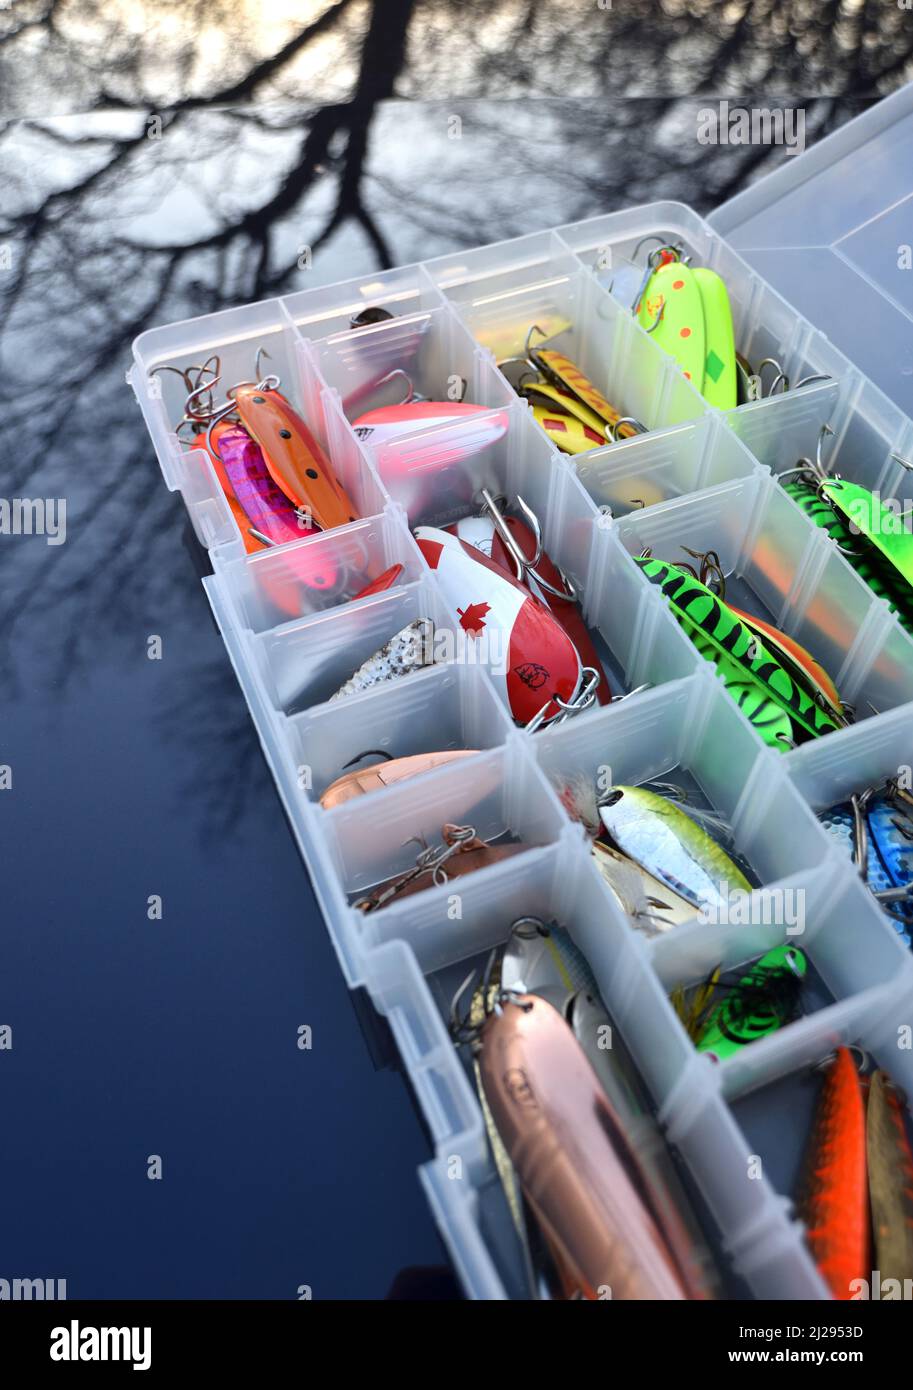 https://c8.alamy.com/comp/2J2953D/fishing-tackle-lures-and-tackle-box-2J2953D.jpg